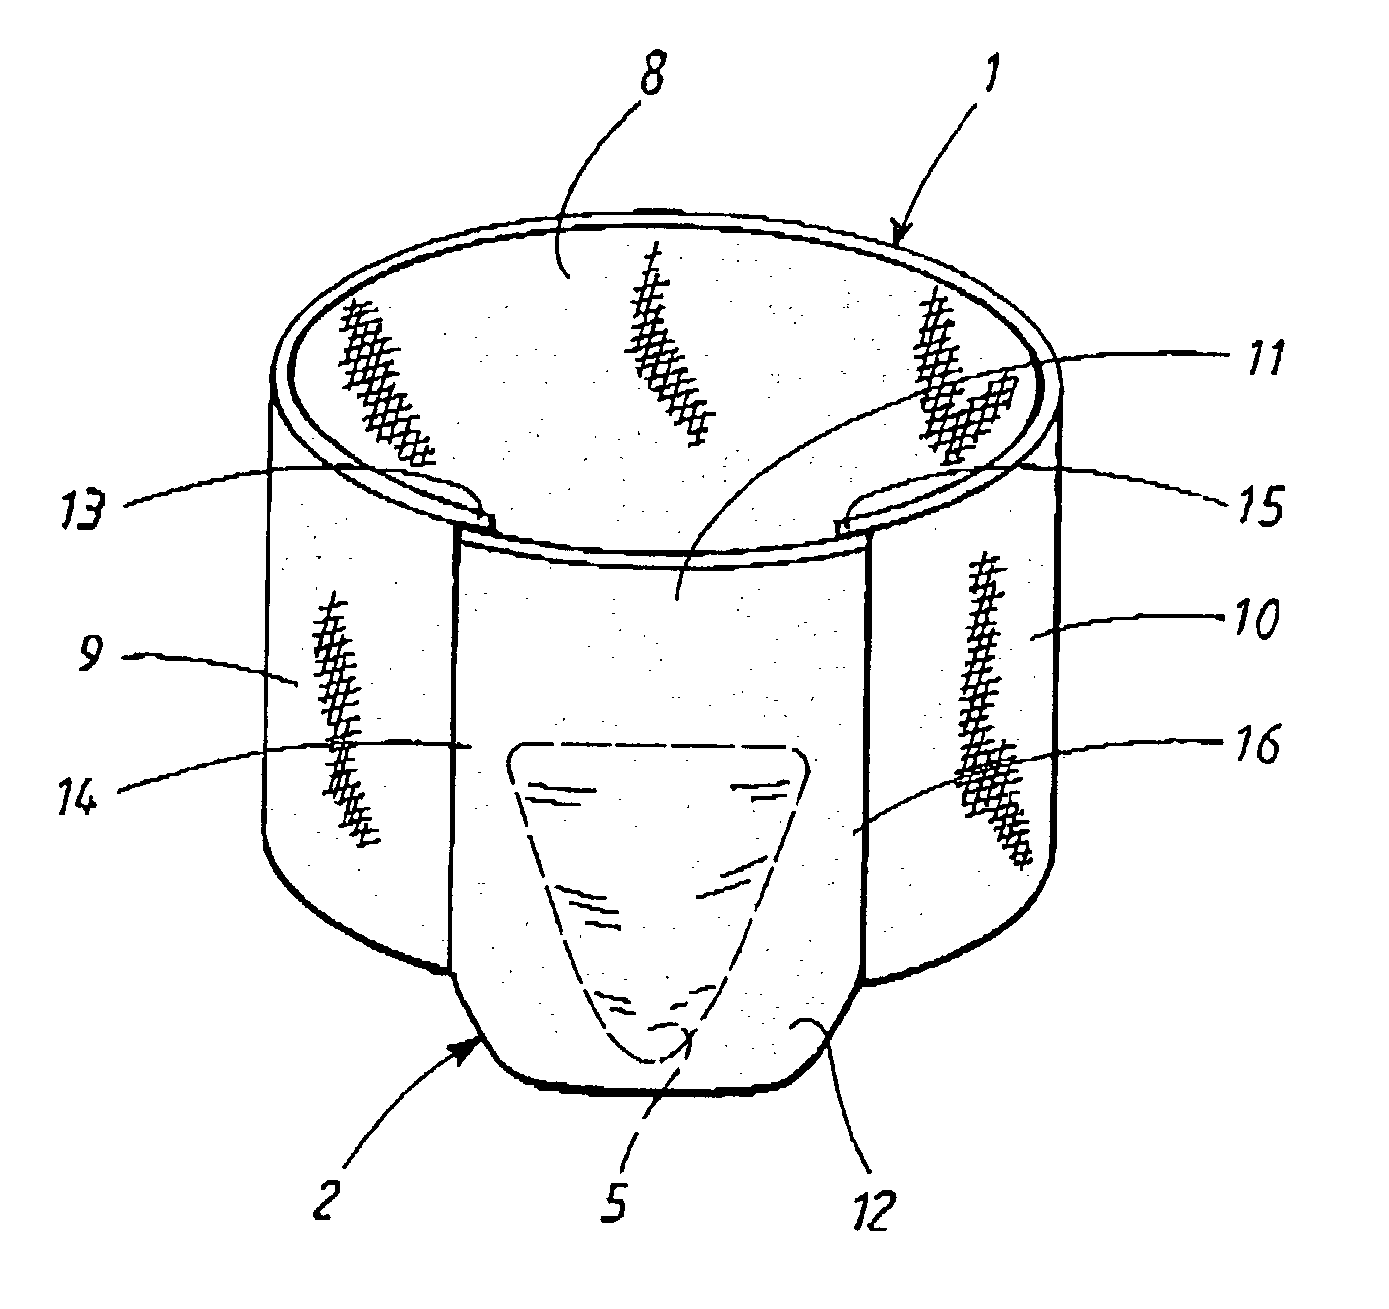 Absorbent article with two-piece construction and method of making the same